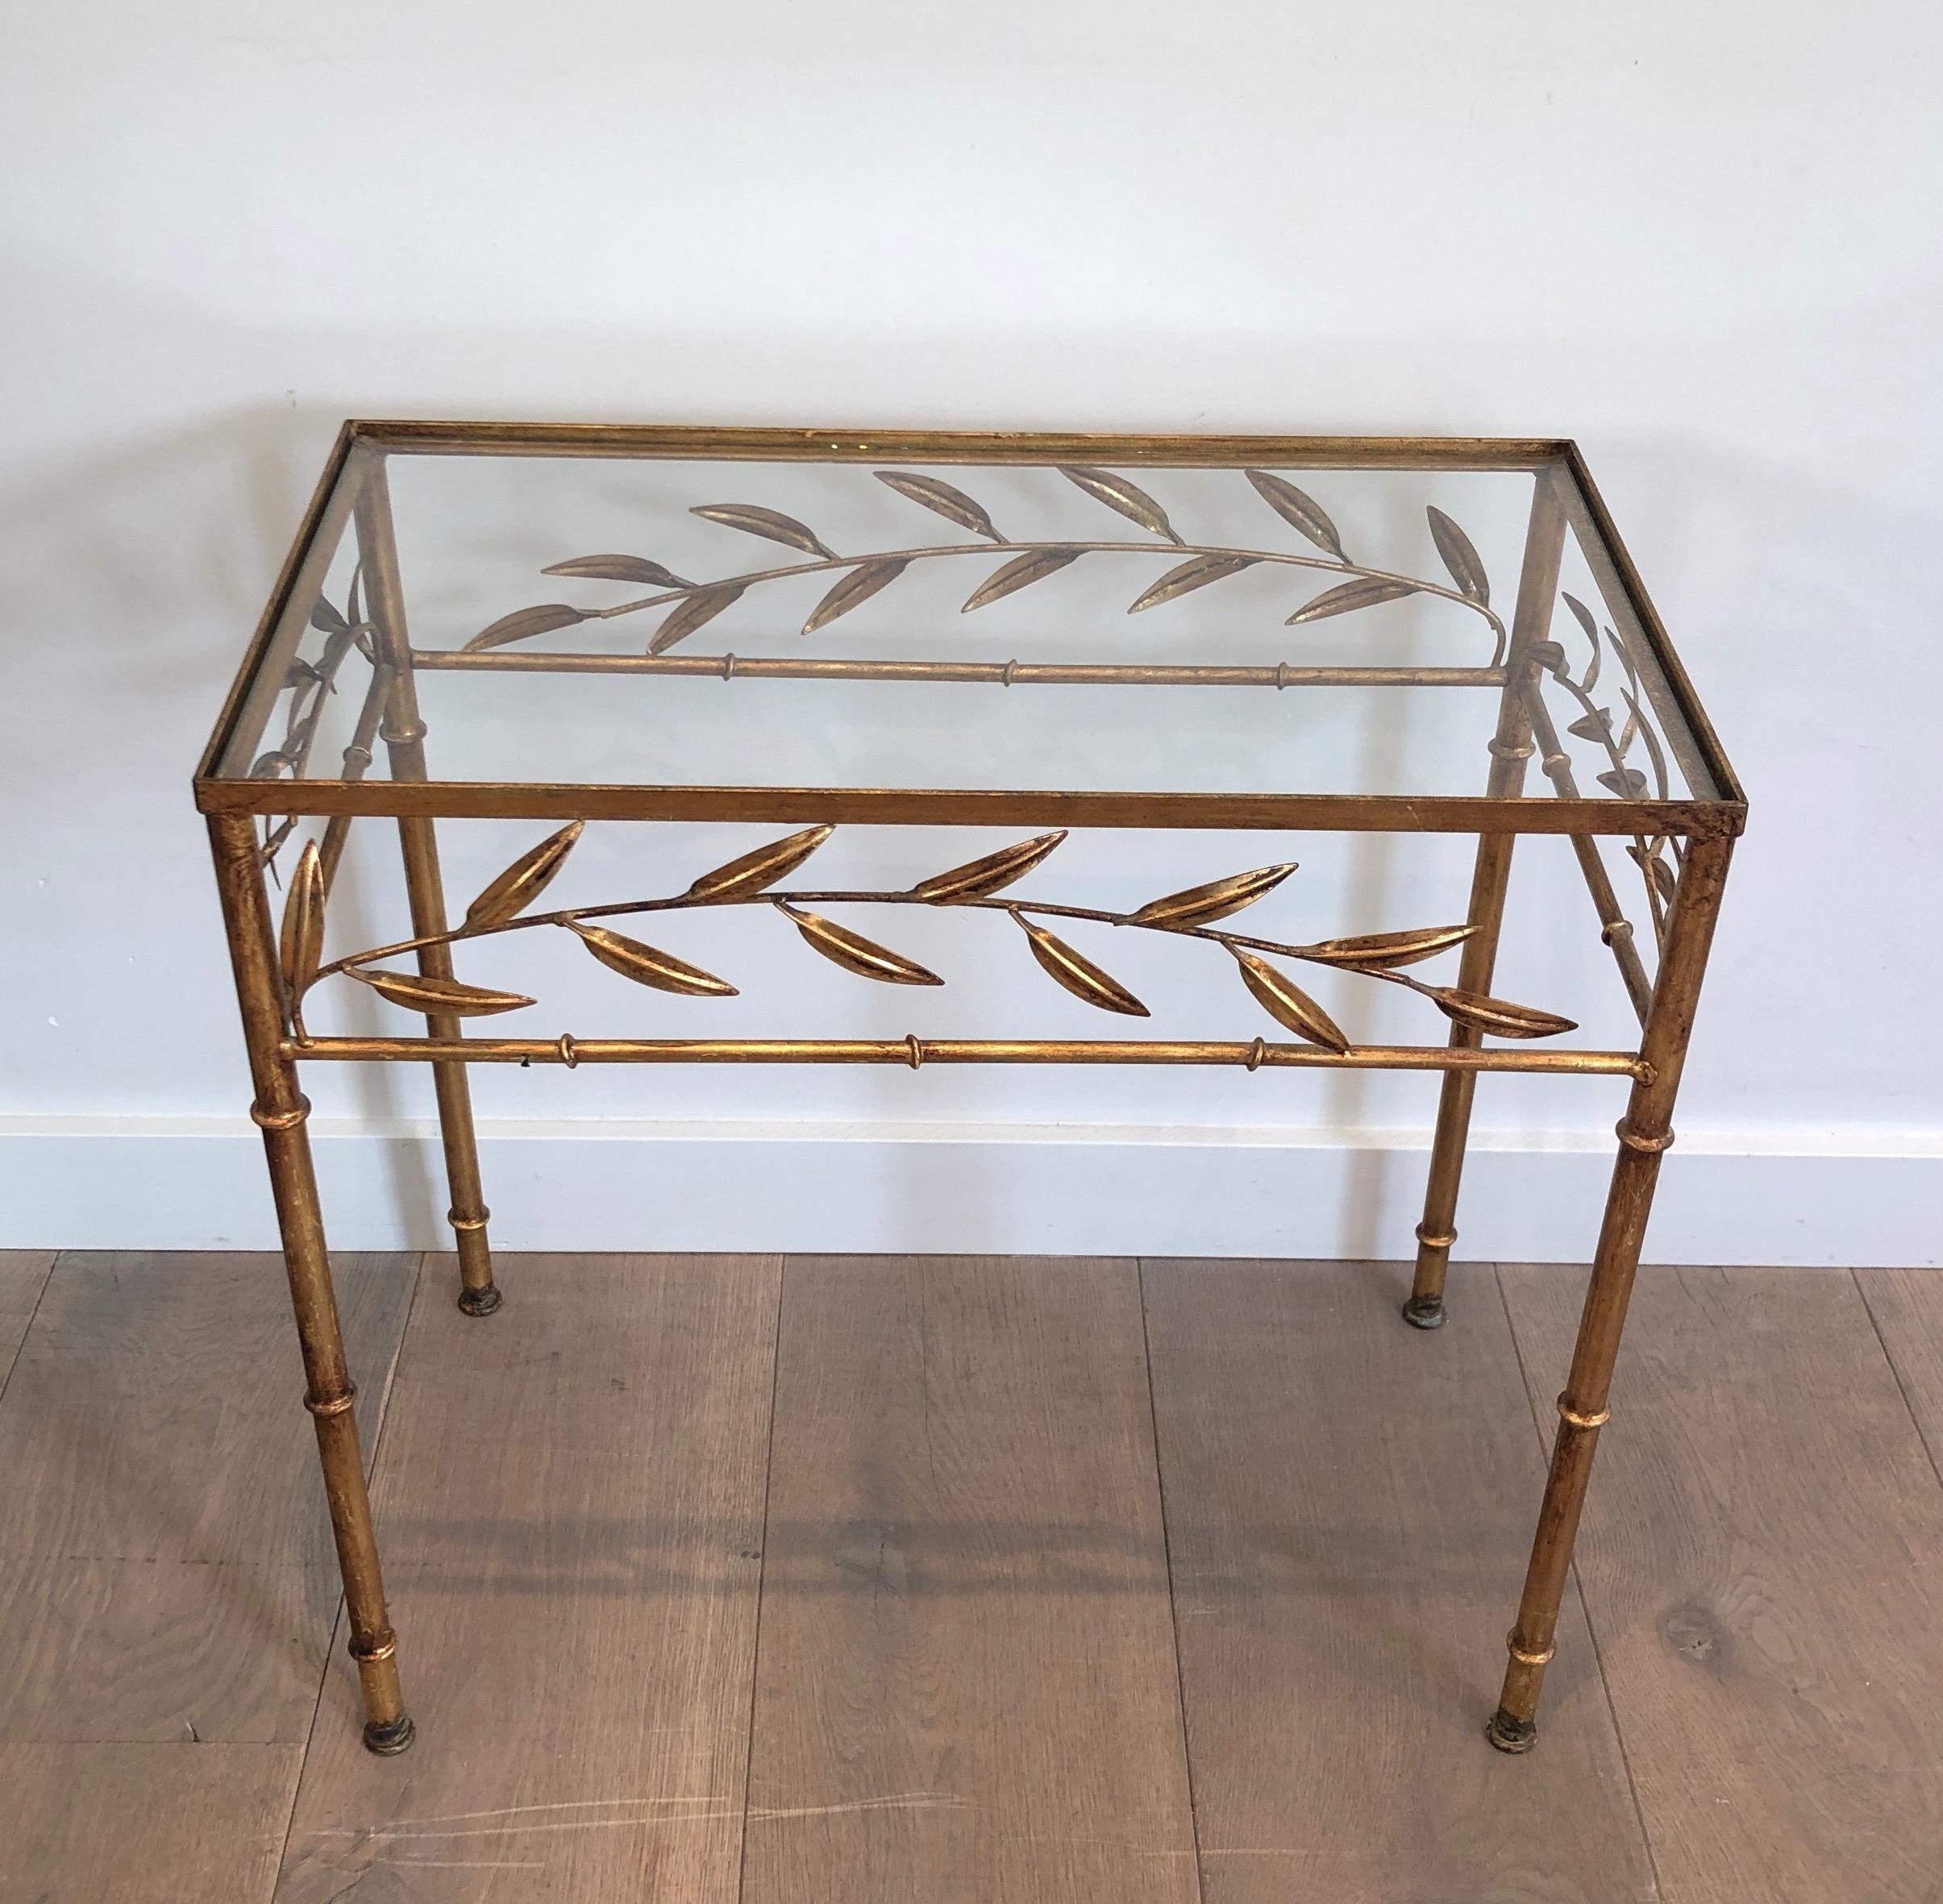 This very nice and decorative small rectangular table is made of gilt leaves. This is a French work, in the style of Coco Channel, circa 1970.